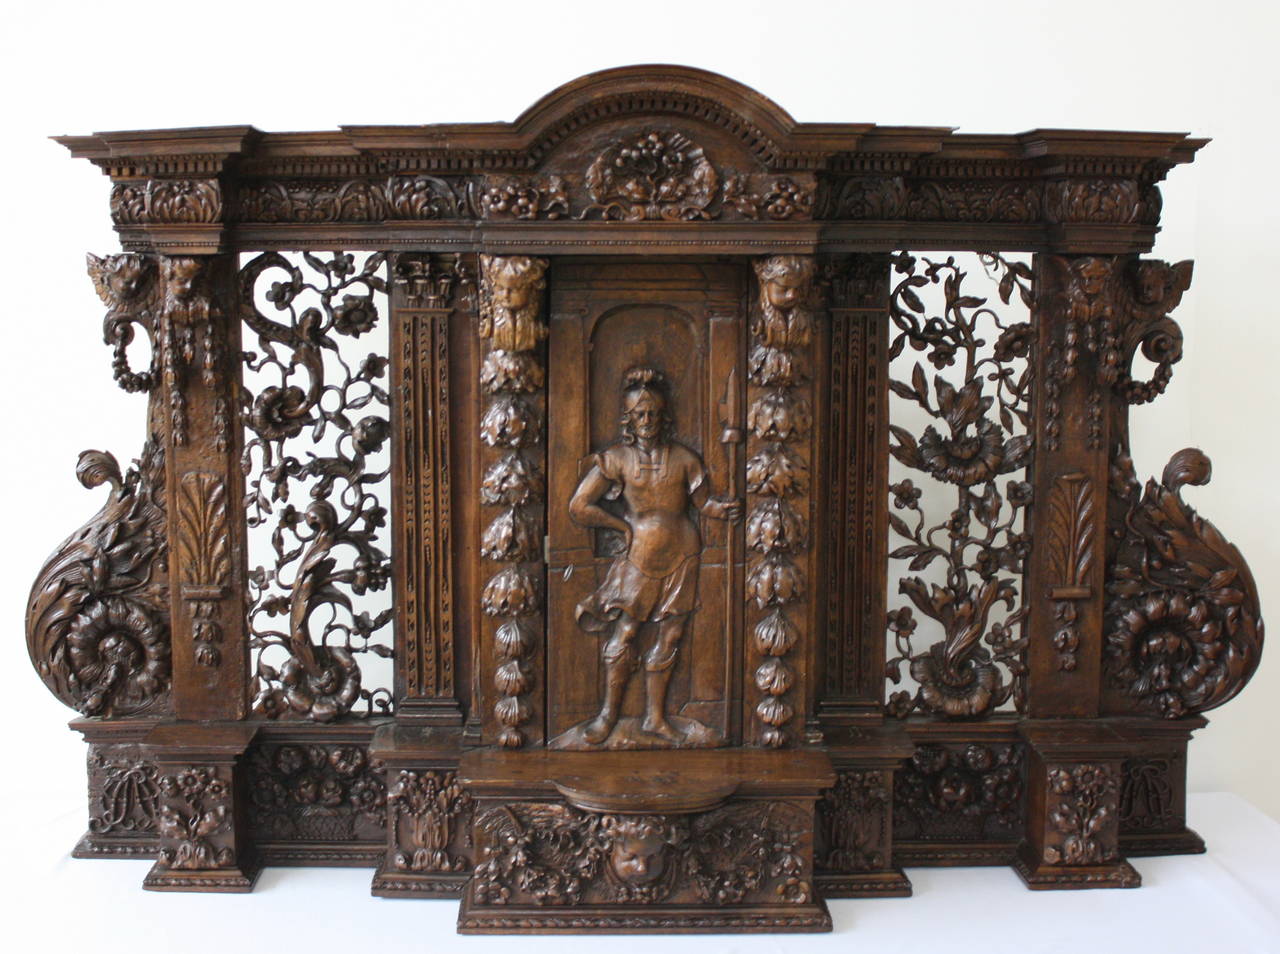 Marvelous carved tabernacle, one centered door, guard from a soldier with a halberd. Walnut.